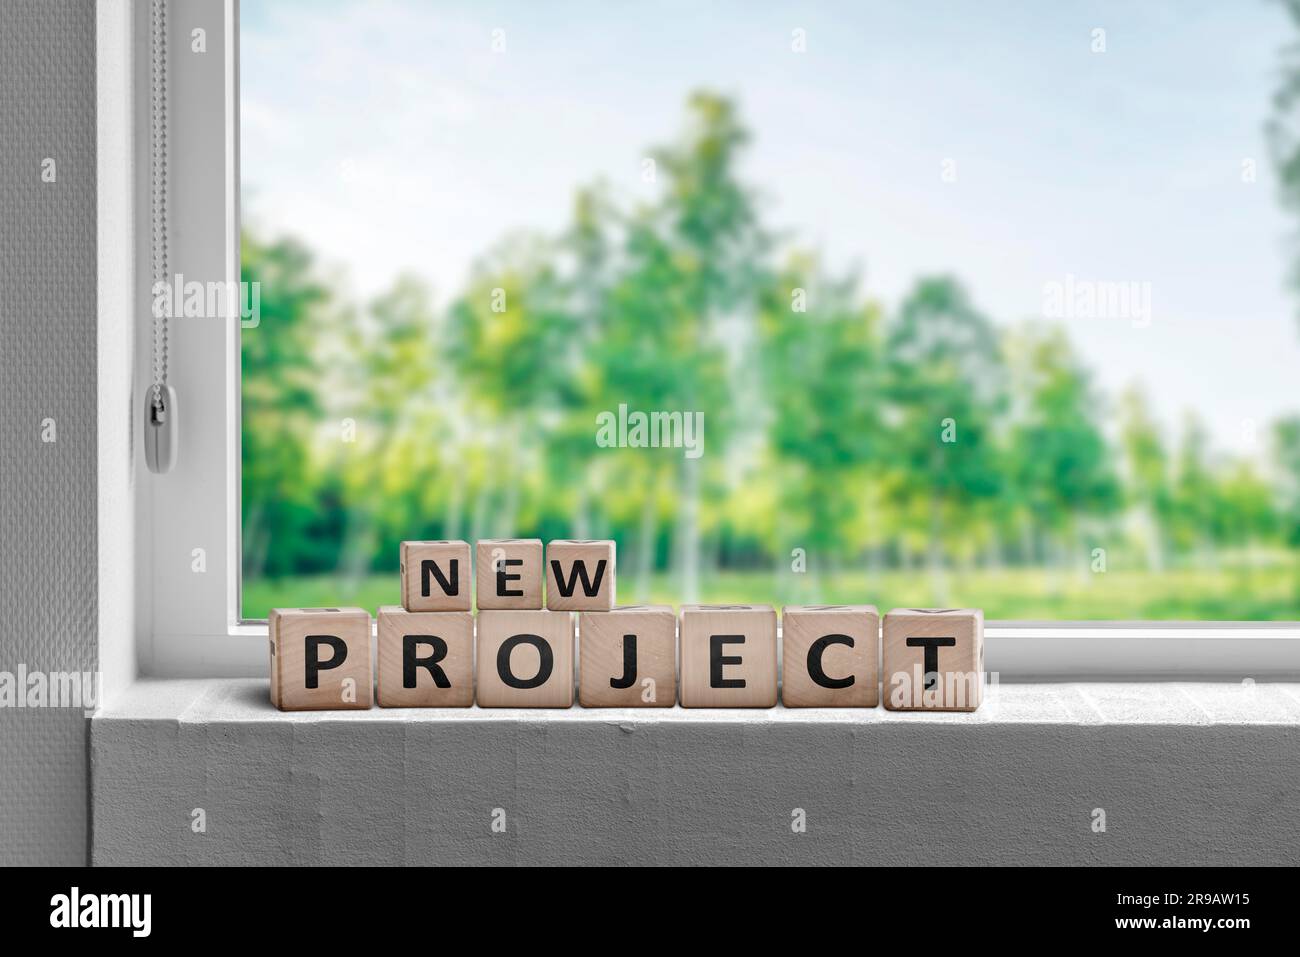 New project sign in a window sill with green trees in the garden Stock Photo